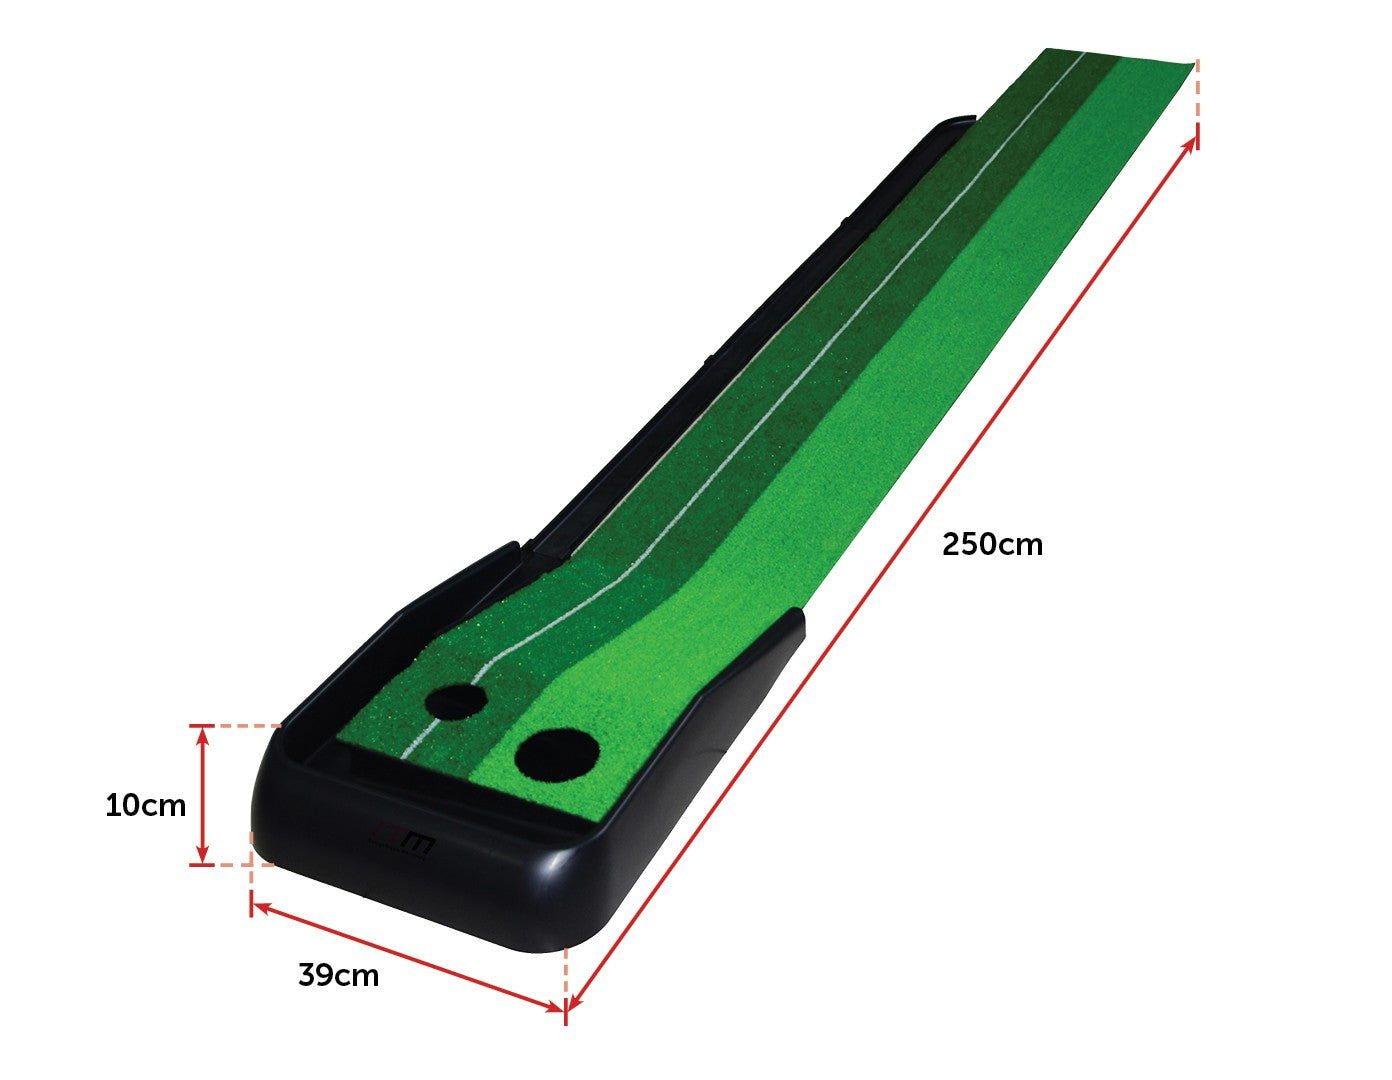 Indoor Practice Putting Green 2.5m Mat Inclined Ball Return Fake Grass 2 Holes - image2